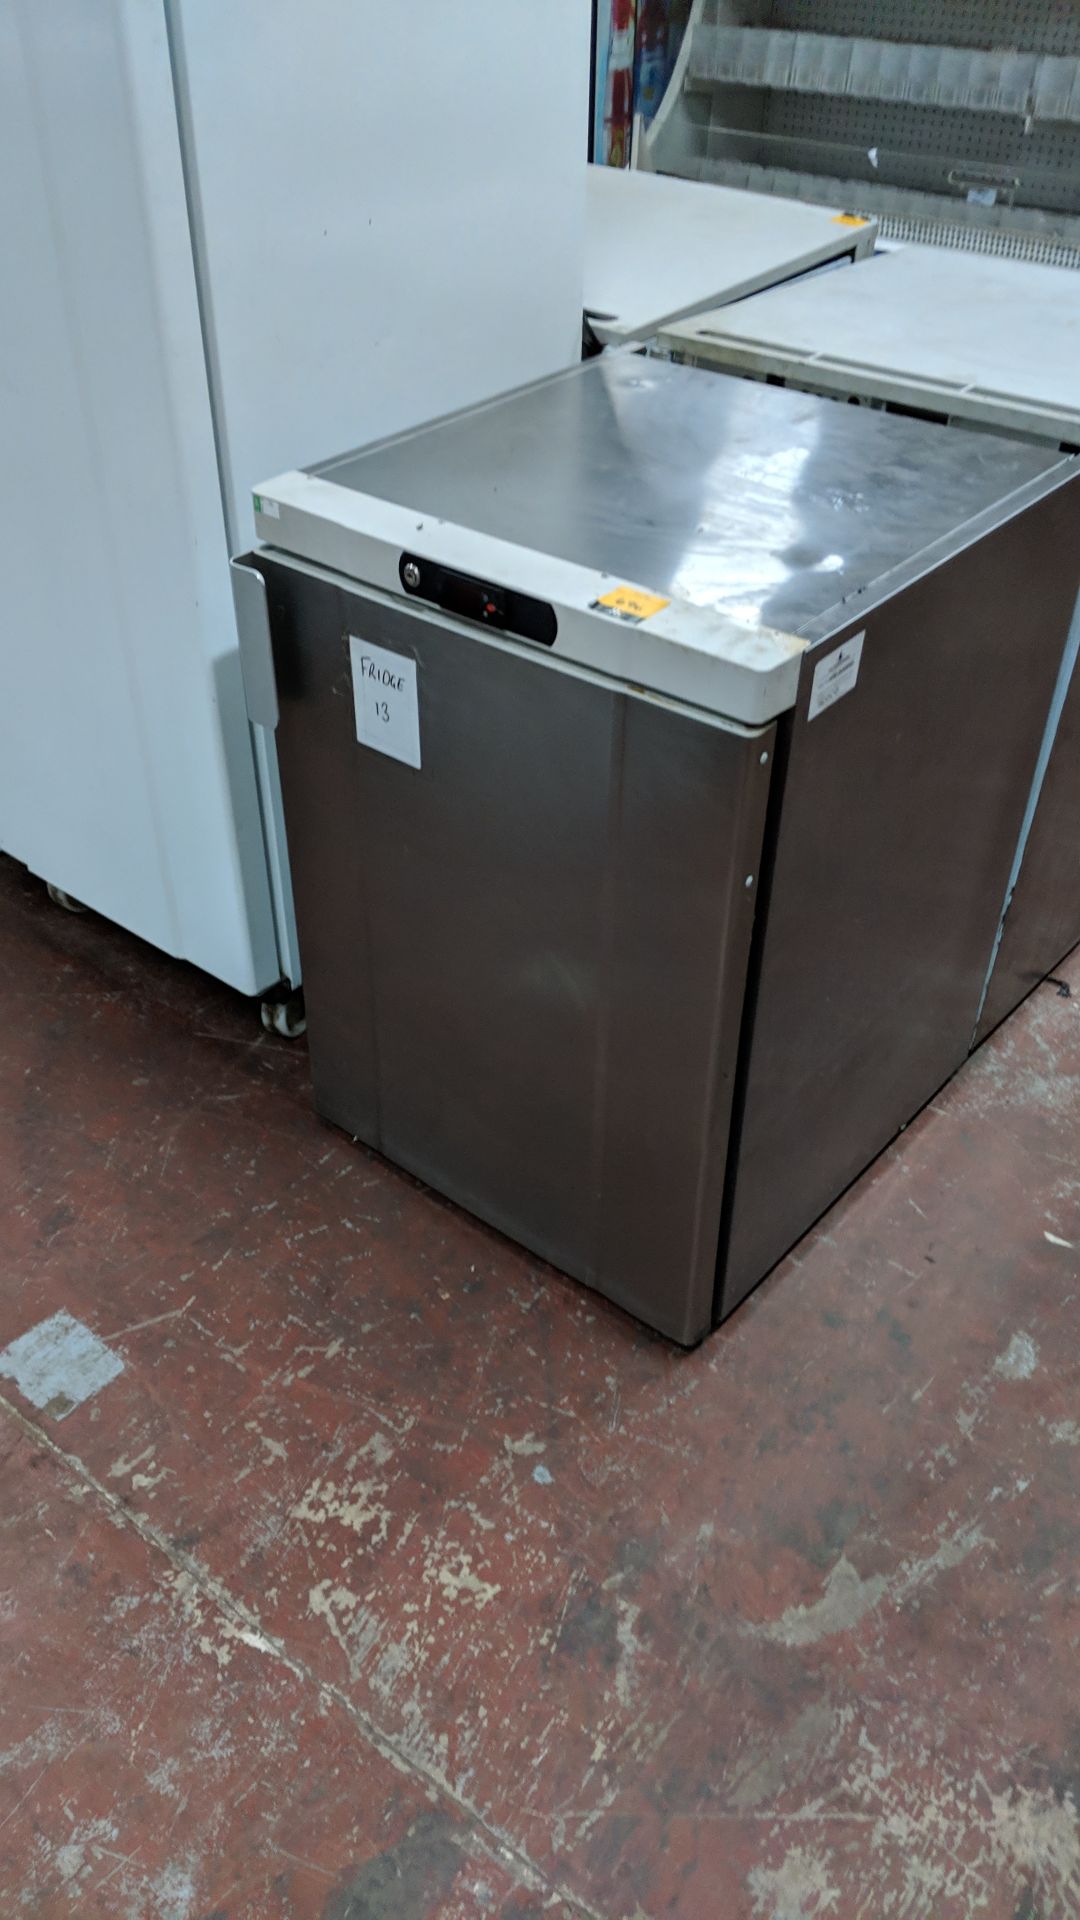 Stainless steel under counter fridge IMPORTANT: Please remember goods successfully bid upon must